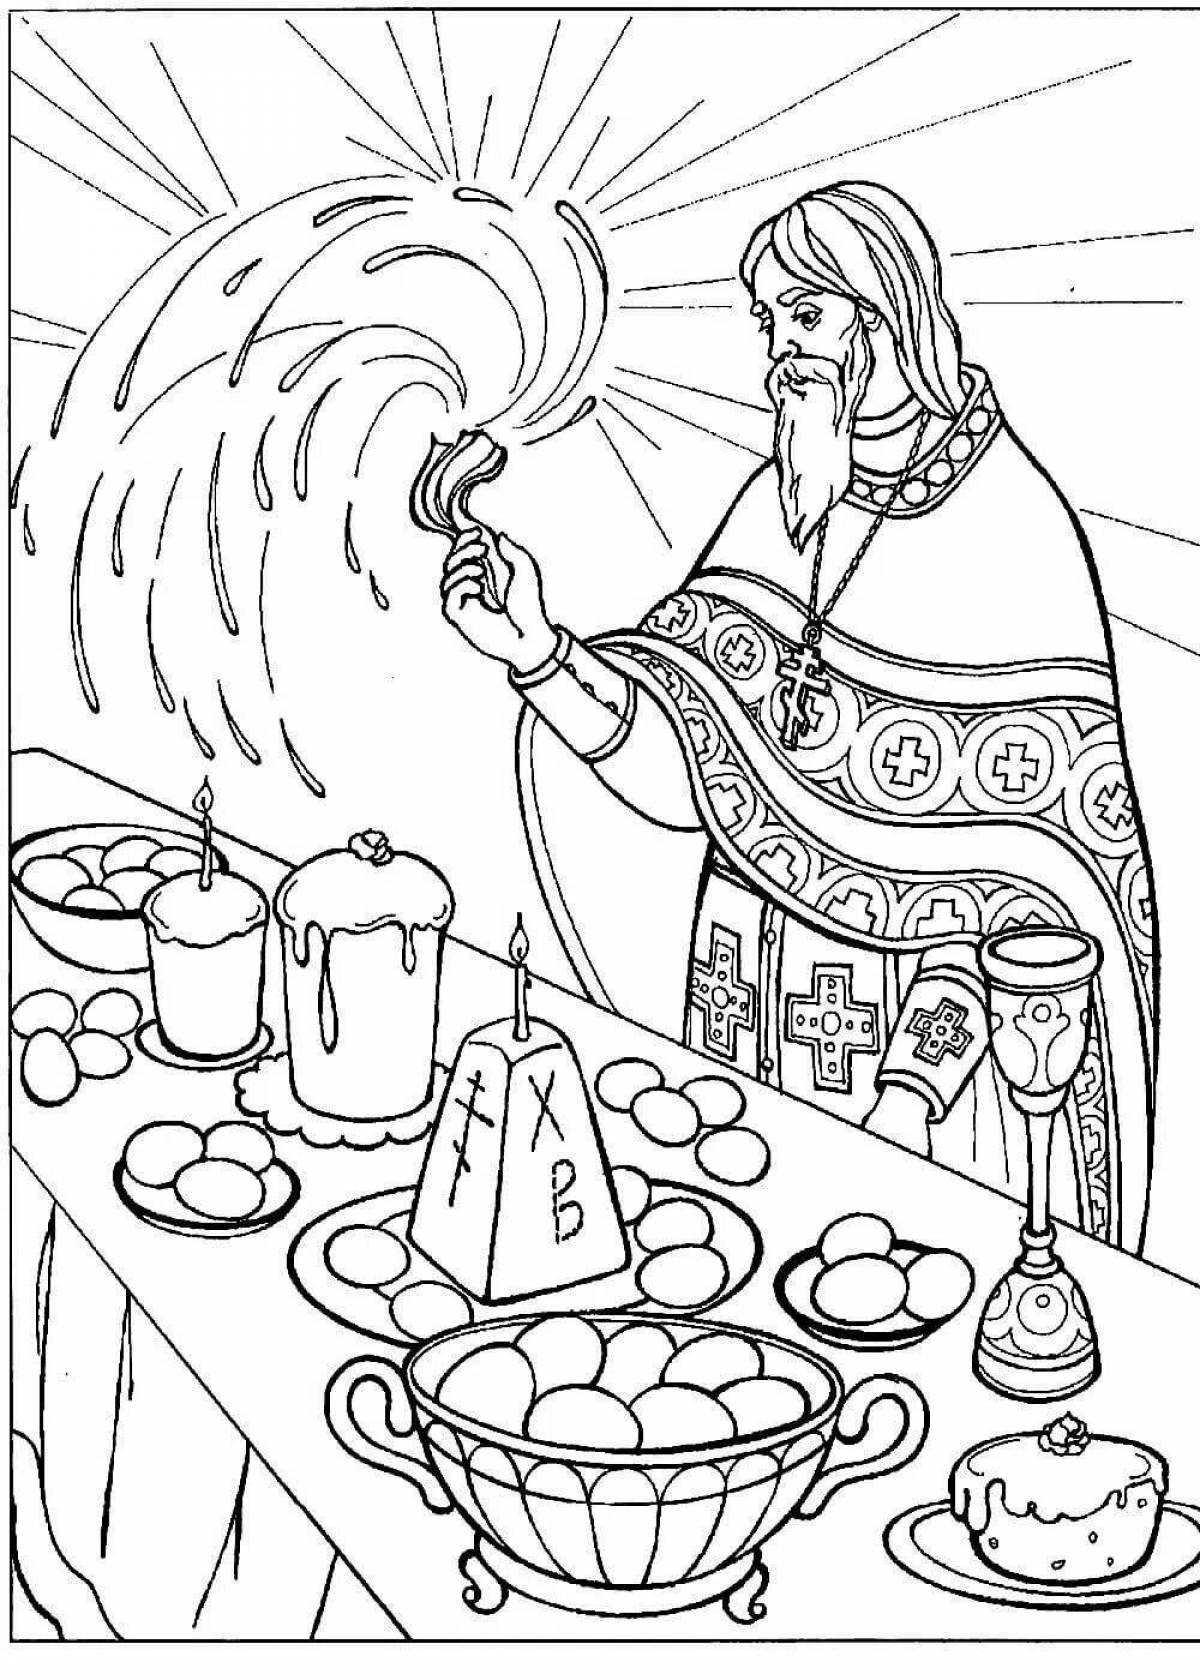 Radiant orthodox coloring book for children